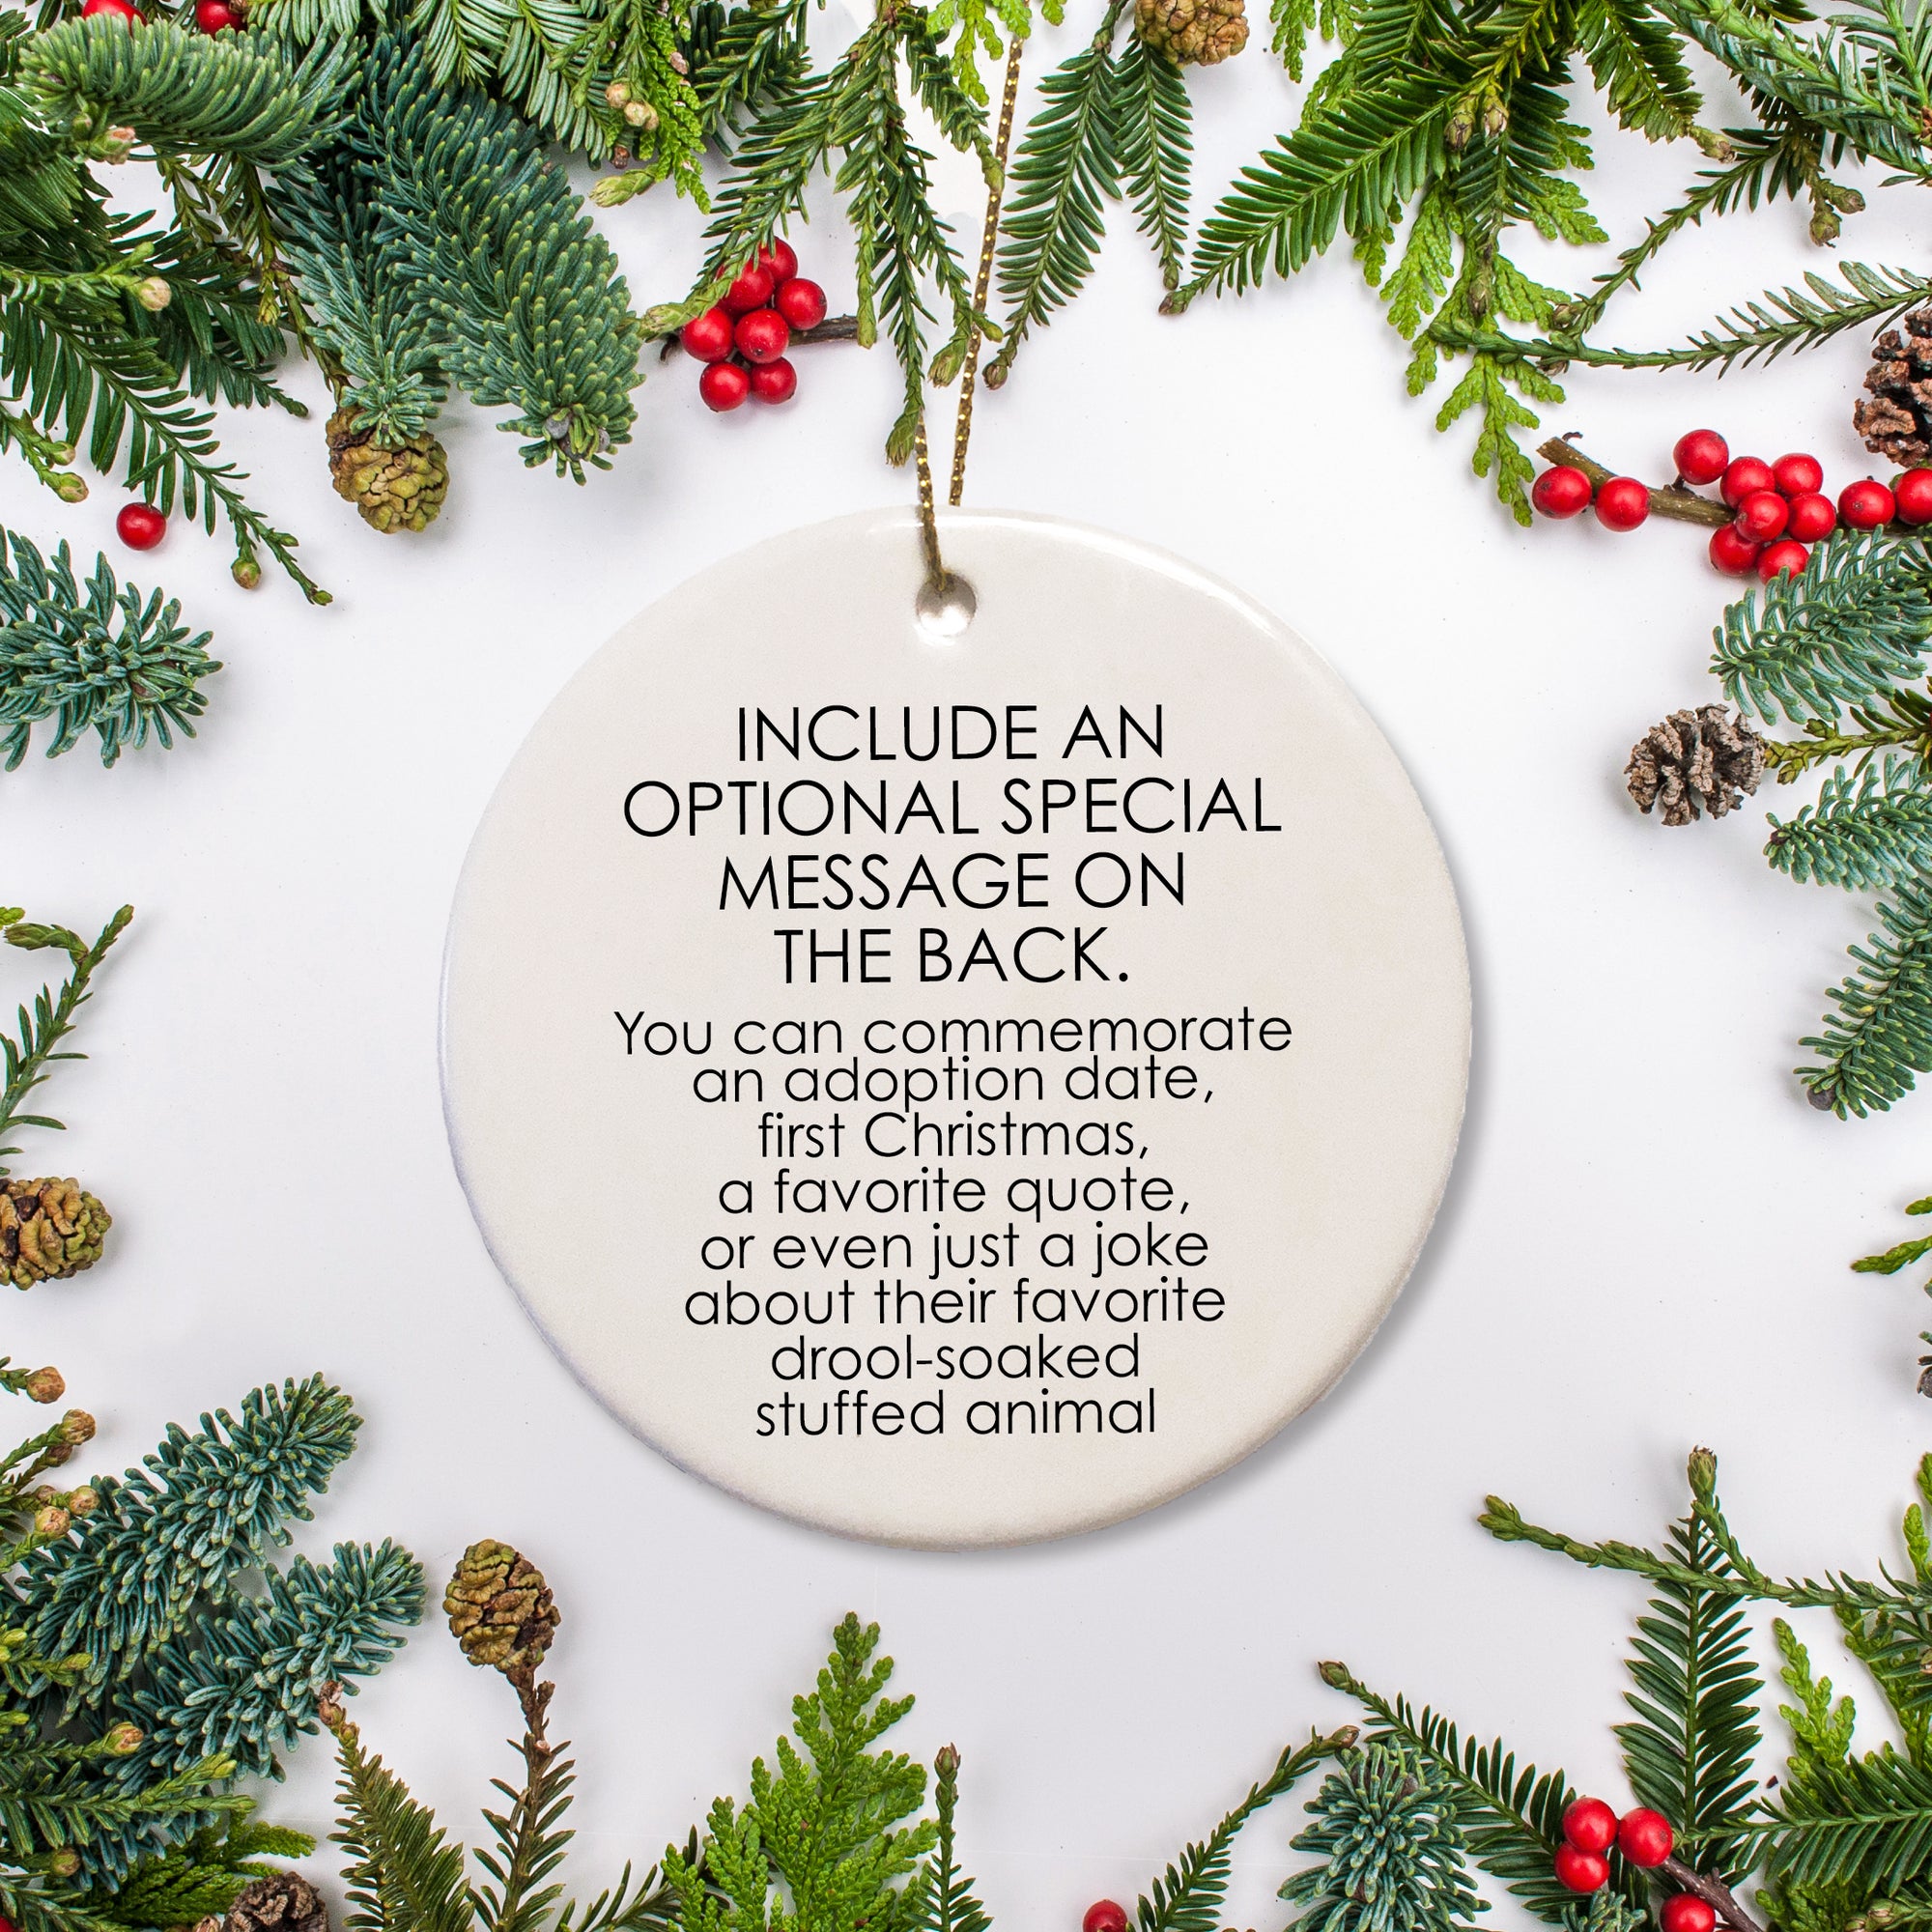 A special message about your Irish wolfhound can be left on the back of the ornament.  It is an option to commemorate an adoption date, a first Christmas, a funny story about your pup, or a favorite quote- the choice is yours!